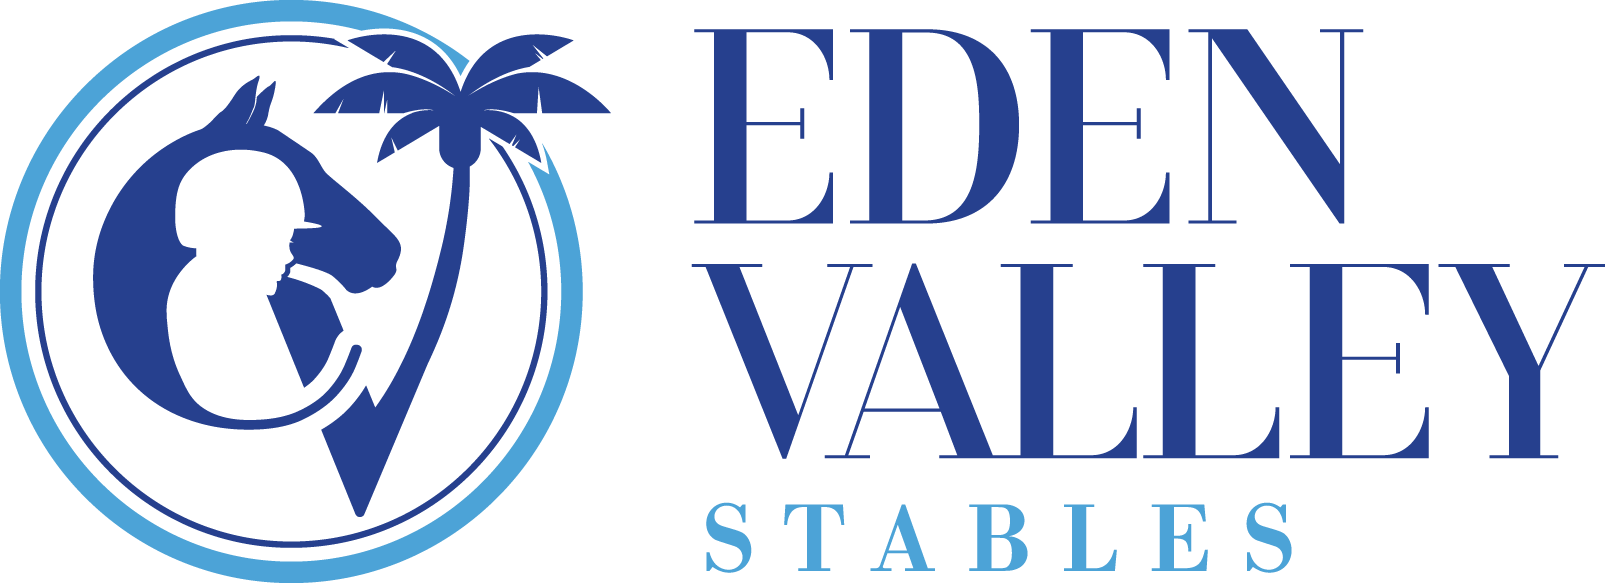 Edenvalley Stables